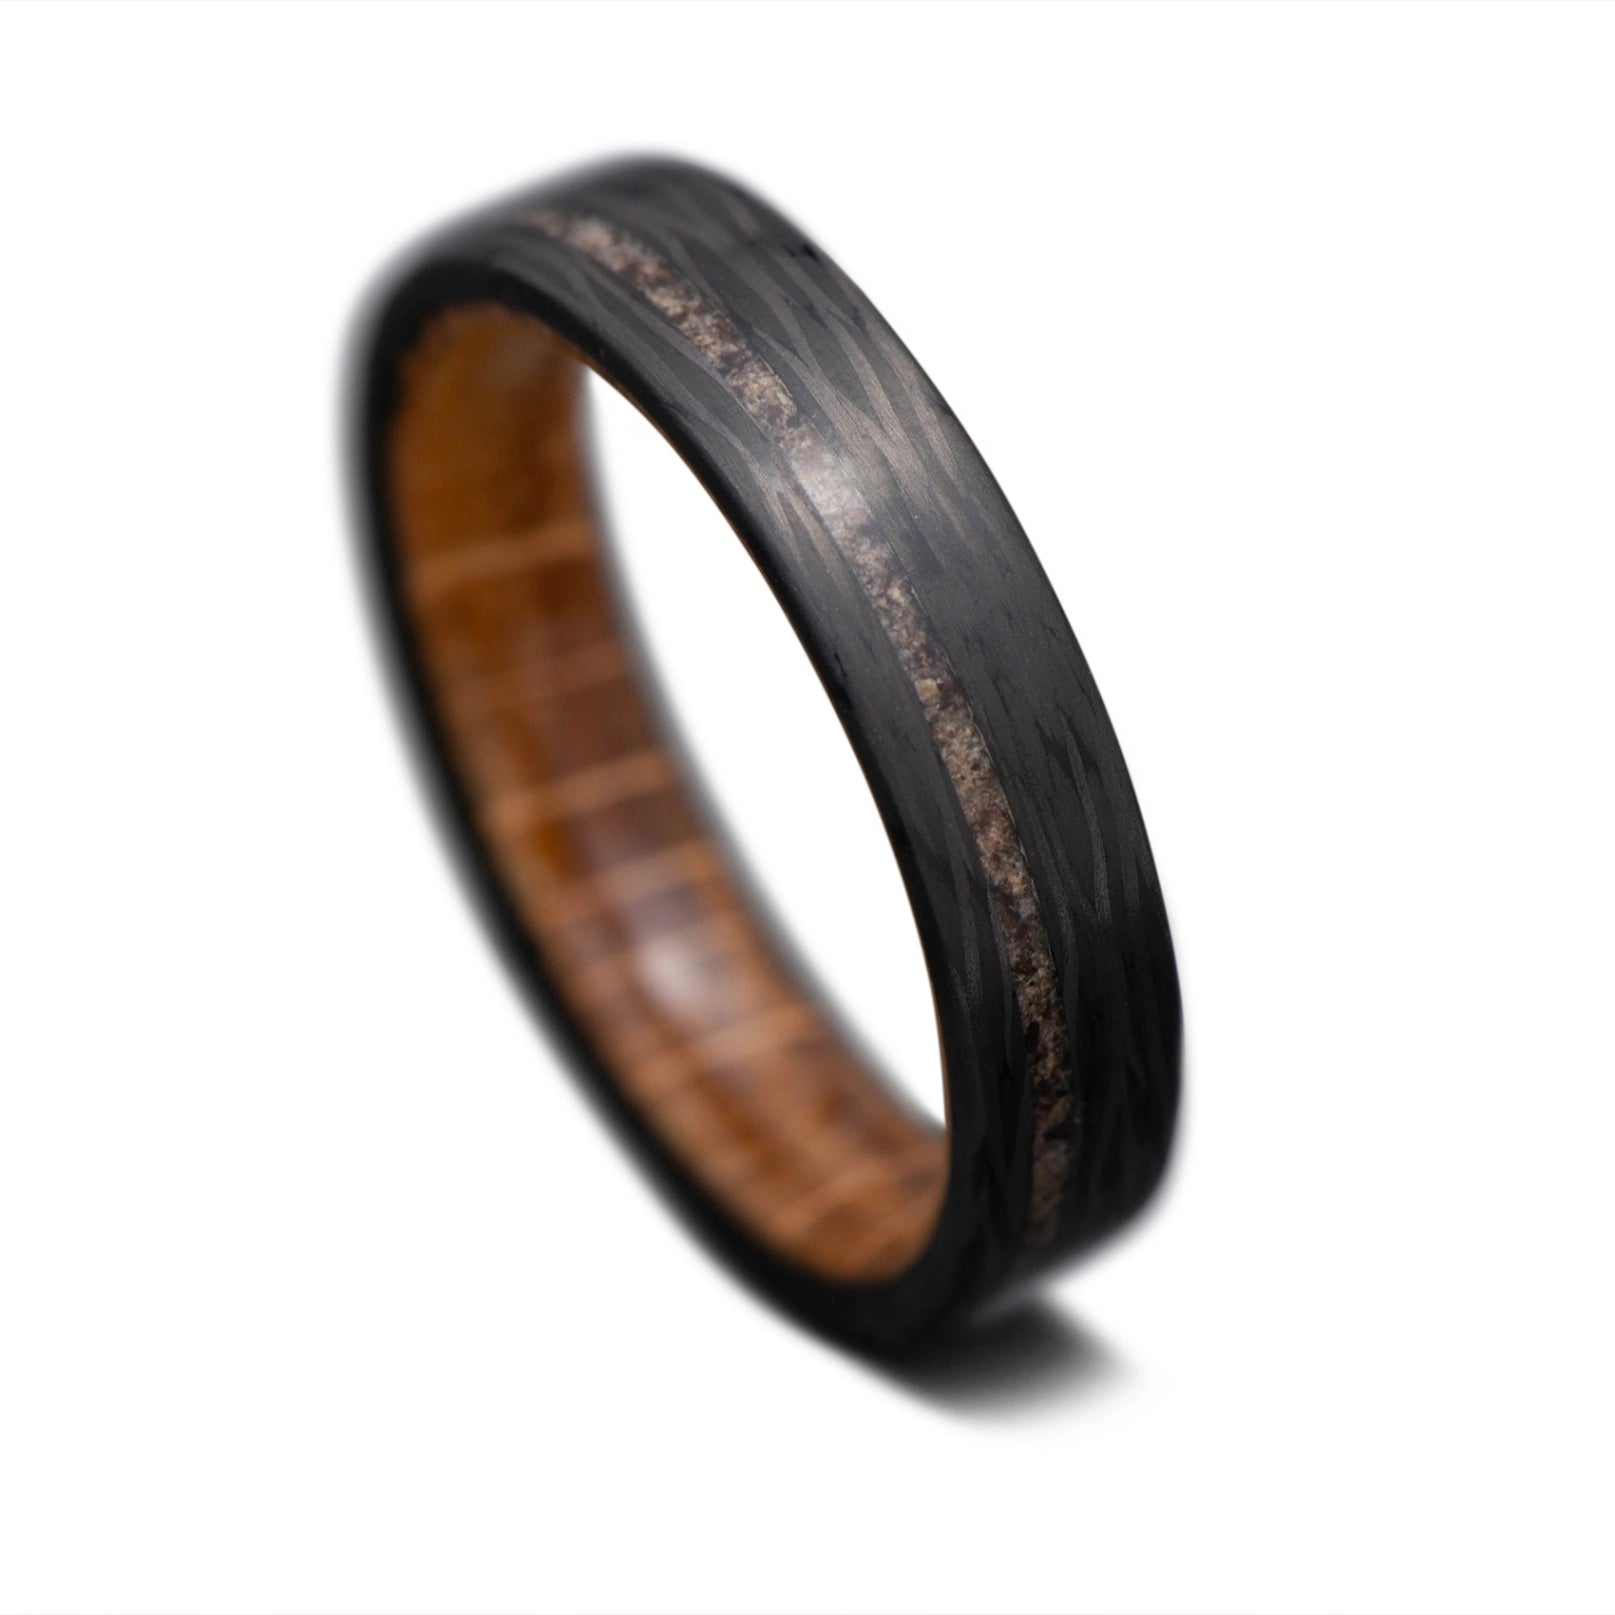 CarbonX core ring with Crushed T-Rex inlay and Whiskey Barrel Oak inner sleeve, 5mm -THE DIVERGENCE